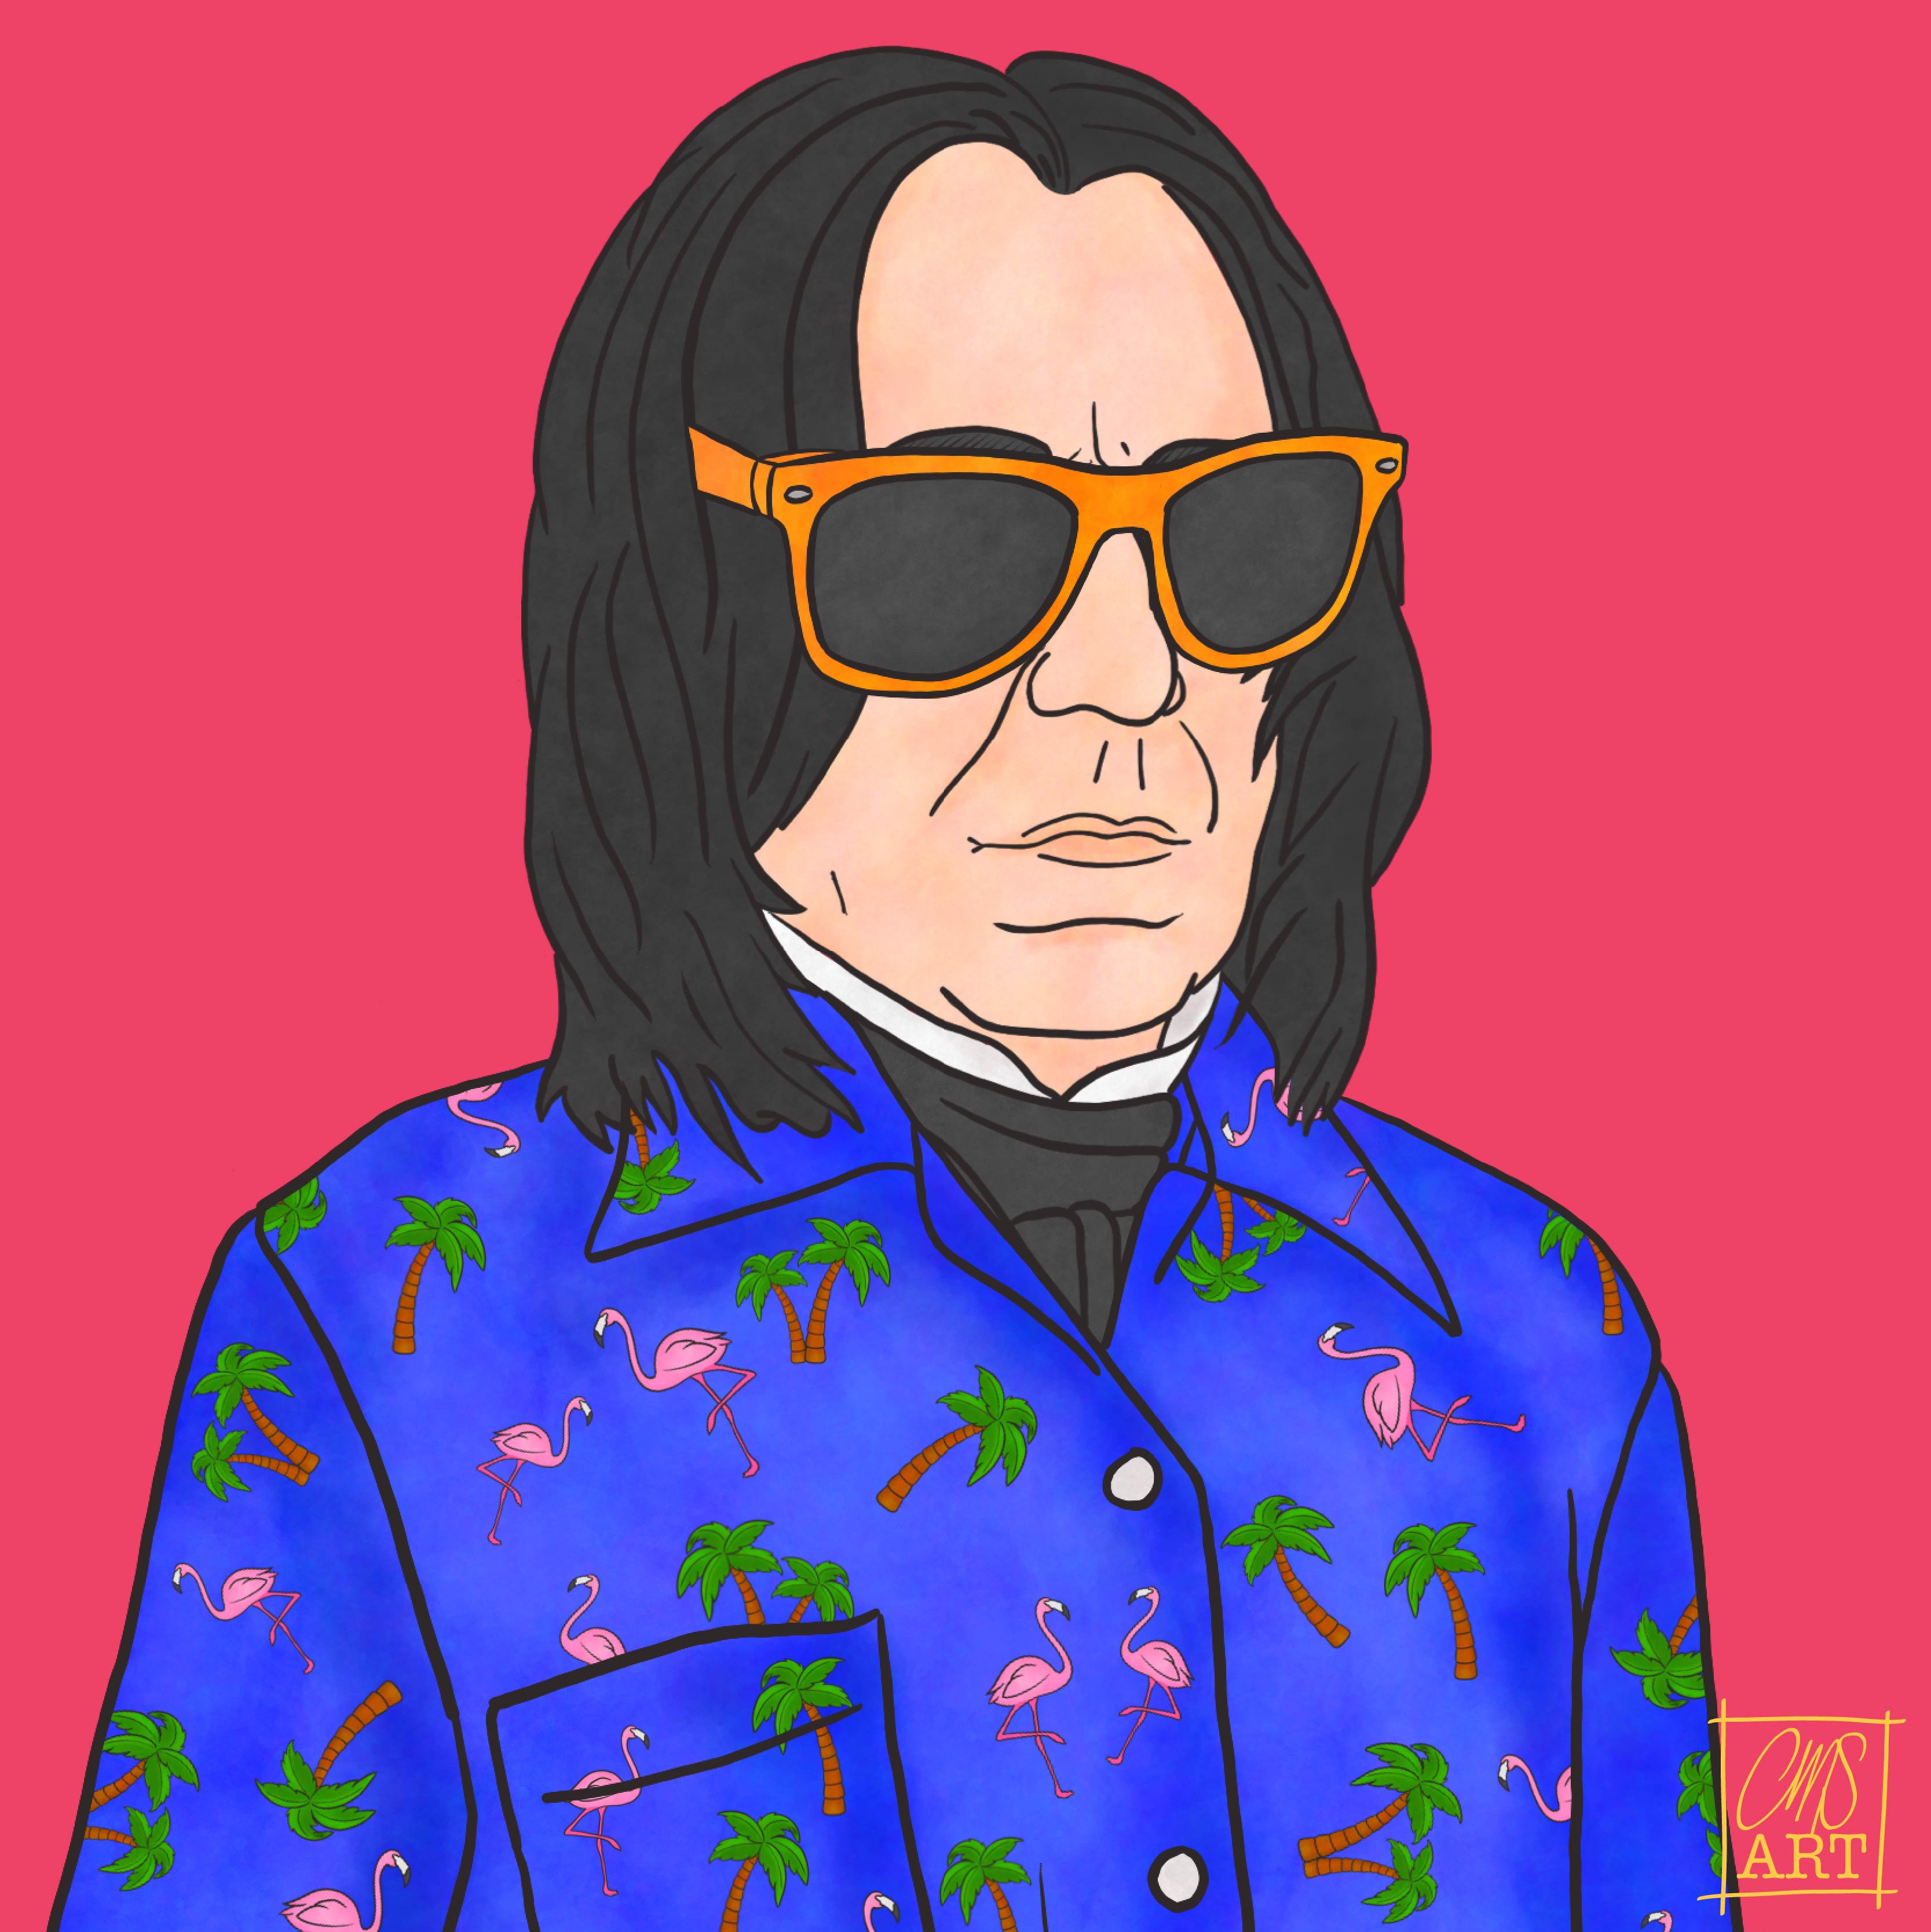 Illustration of Alan Rickman as Severus Snape wearing a Hawaiian shirt and sunglasses looking serious but ready to hit the beach on a pink background